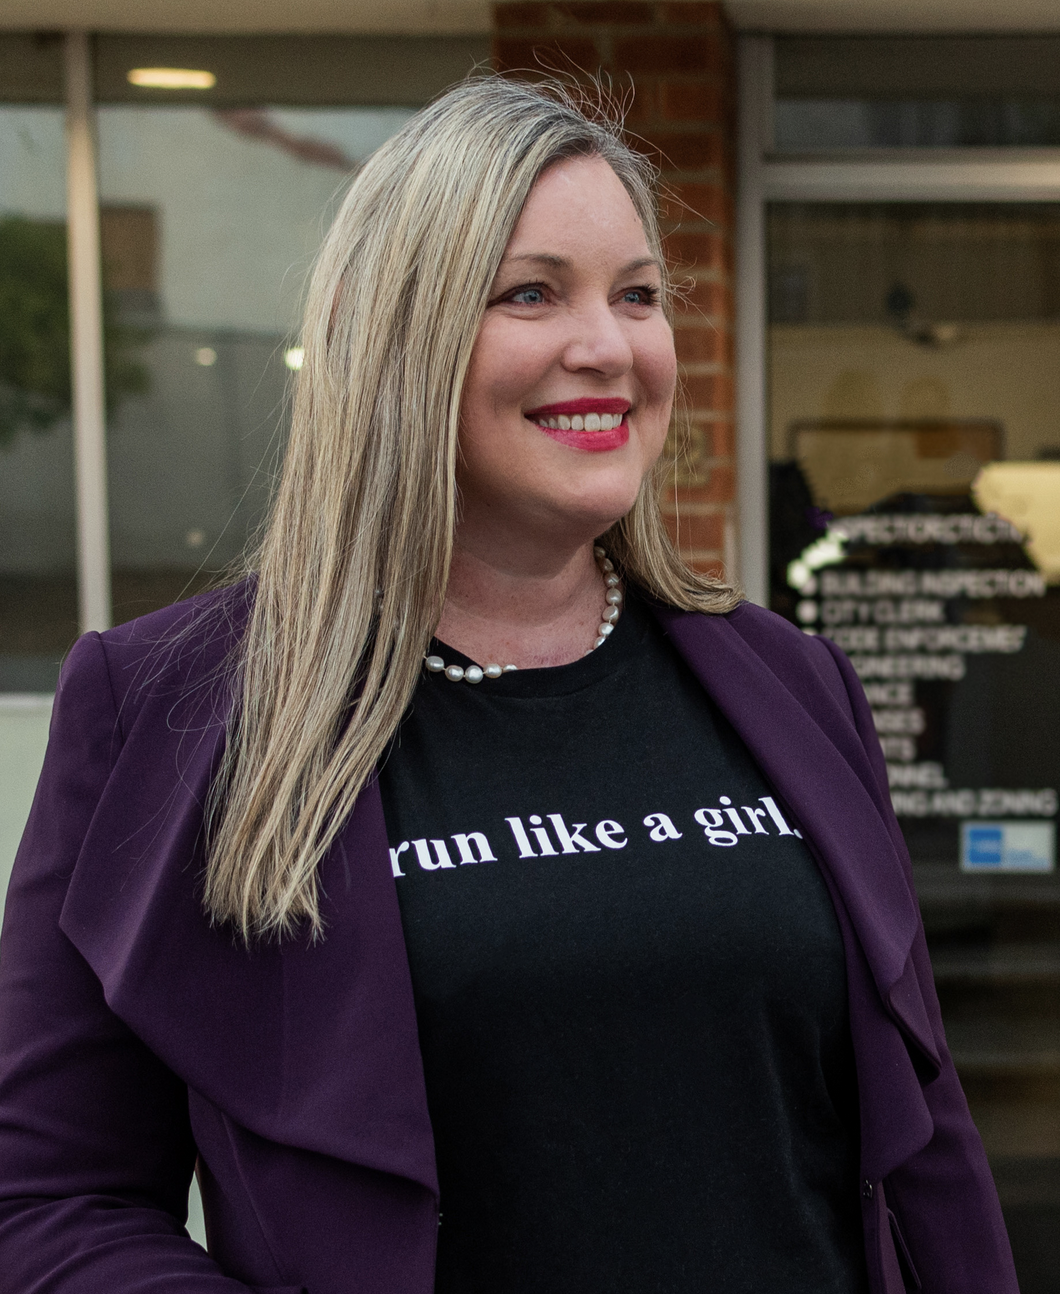 Medium body shot of Alysson Snow outside a building wearing a purple jacket with black shirt beneath with white text saying "run like a girl" smiling and looking to the right